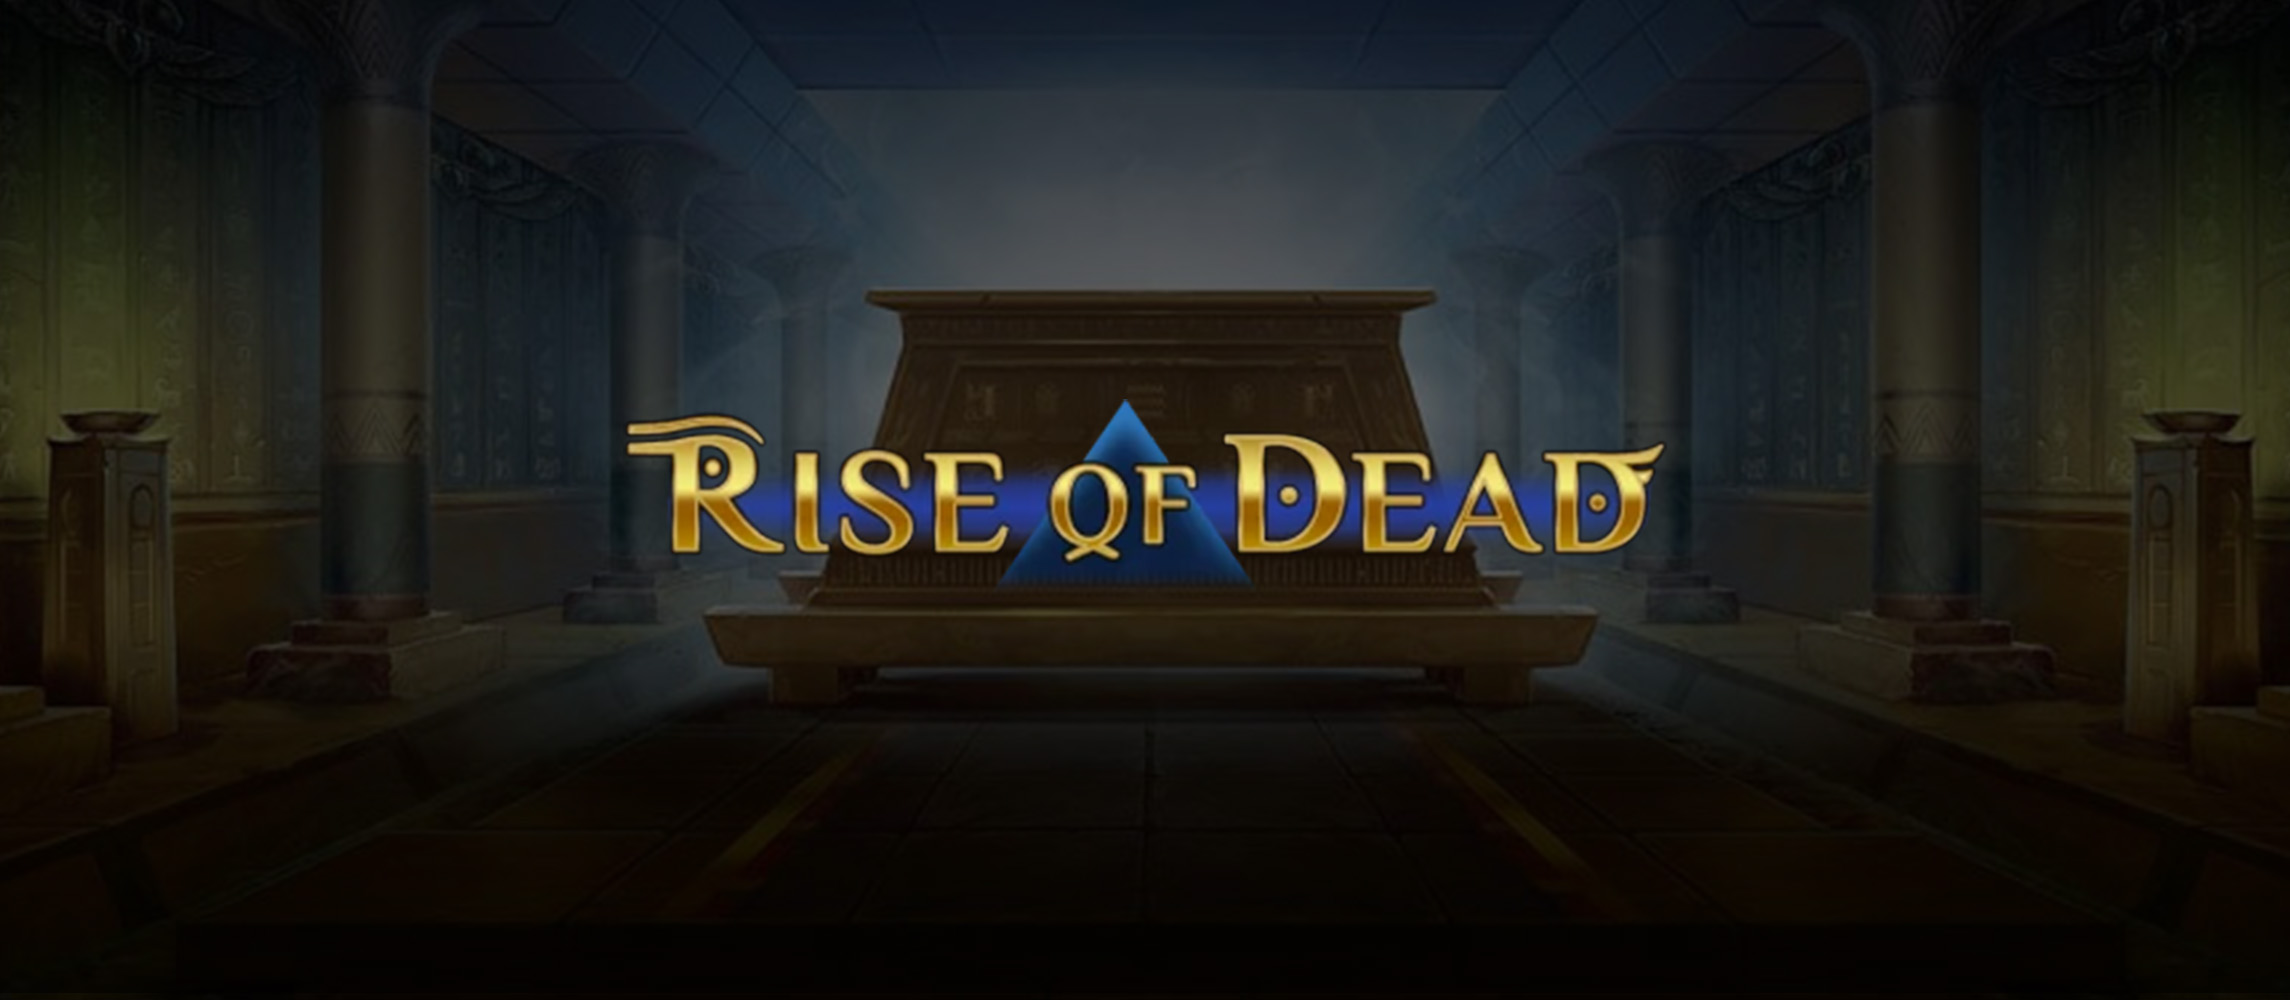 Rise of Dead by Play'n GO